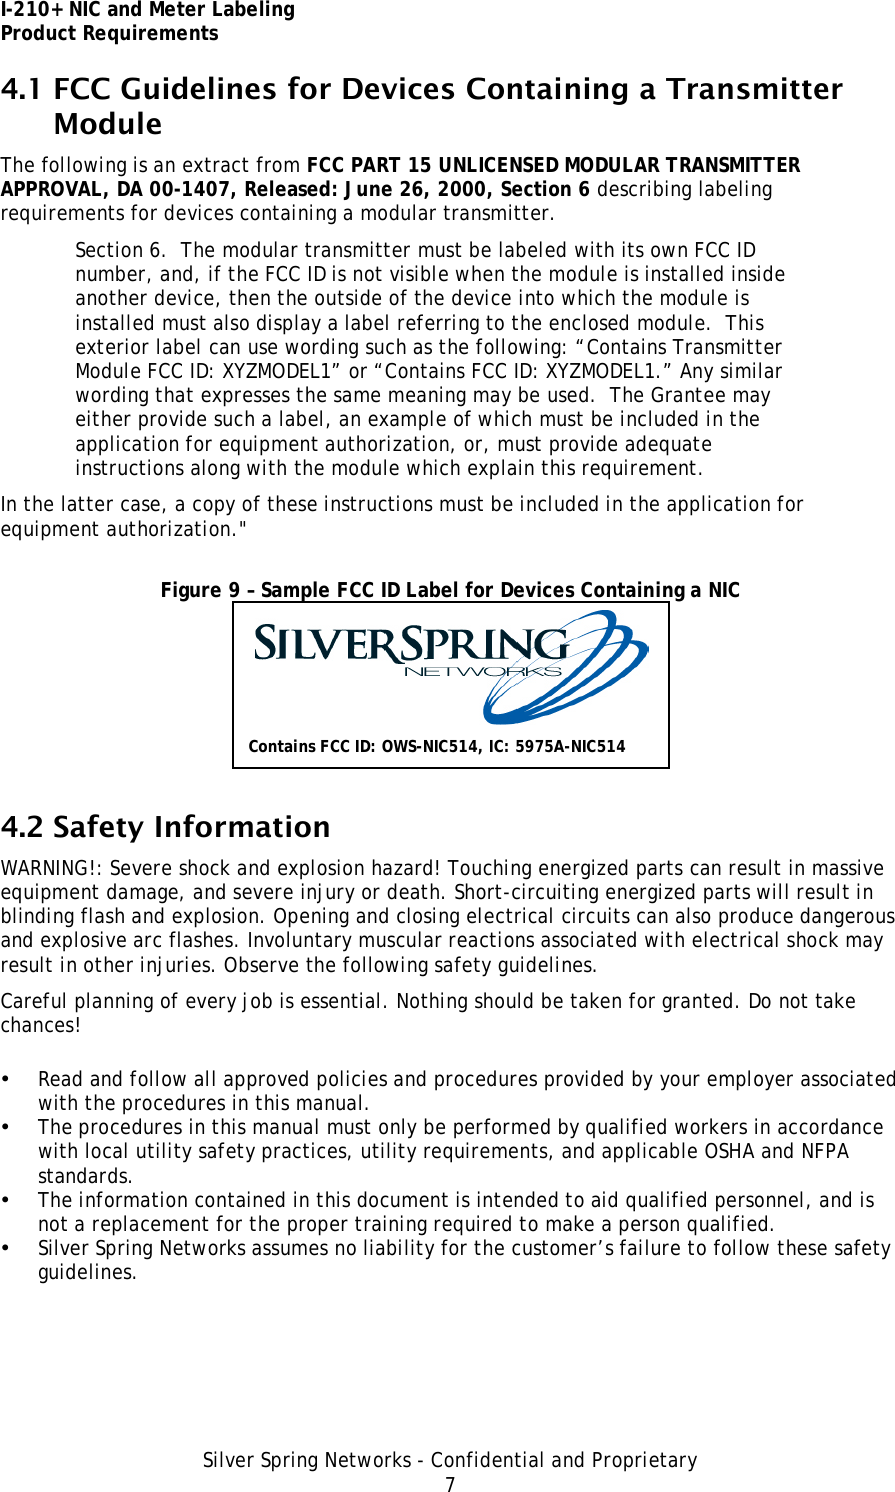 I-210+ NIC and Meter Labeling Product Requirements Silver Spring Networks - Confidential and Proprietary 7 4.1 FCC Guidelines for Devices Containing a Transmitter Module The following is an extract from FCC PART 15 UNLICENSED MODULAR TRANSMITTER APPROVAL, DA 00-1407, Released: June 26, 2000, Section 6 describing labeling requirements for devices containing a modular transmitter. Section 6.  The modular transmitter must be labeled with its own FCC ID number, and, if the FCC ID is not visible when the module is installed inside another device, then the outside of the device into which the module is installed must also display a label referring to the enclosed module.  This exterior label can use wording such as the following: “Contains Transmitter Module FCC ID: XYZMODEL1” or “Contains FCC ID: XYZMODEL1.” Any similar wording that expresses the same meaning may be used.  The Grantee may either provide such a label, an example of which must be included in the application for equipment authorization, or, must provide adequate instructions along with the module which explain this requirement.  In the latter case, a copy of these instructions must be included in the application for equipment authorization.&quot;  Figure 9 – Sample FCC ID Label for Devices Containing a NIC  4.2 Safety Information WARNING!: Severe shock and explosion hazard! Touching energized parts can result in massive equipment damage, and severe injury or death. Short-circuiting energized parts will result in blinding flash and explosion. Opening and closing electrical circuits can also produce dangerous and explosive arc flashes. Involuntary muscular reactions associated with electrical shock may result in other injuries. Observe the following safety guidelines. Careful planning of every job is essential. Nothing should be taken for granted. Do not take chances! • Read and follow all approved policies and procedures provided by your employer associated with the procedures in this manual. • The procedures in this manual must only be performed by qualified workers in accordance with local utility safety practices, utility requirements, and applicable OSHA and NFPA standards. • The information contained in this document is intended to aid qualified personnel, and is not a replacement for the proper training required to make a person qualified. • Silver Spring Networks assumes no liability for the customer’s failure to follow these safety guidelines. Contains FCC ID: OWS-NIC514, IC: 5975A-NIC514 